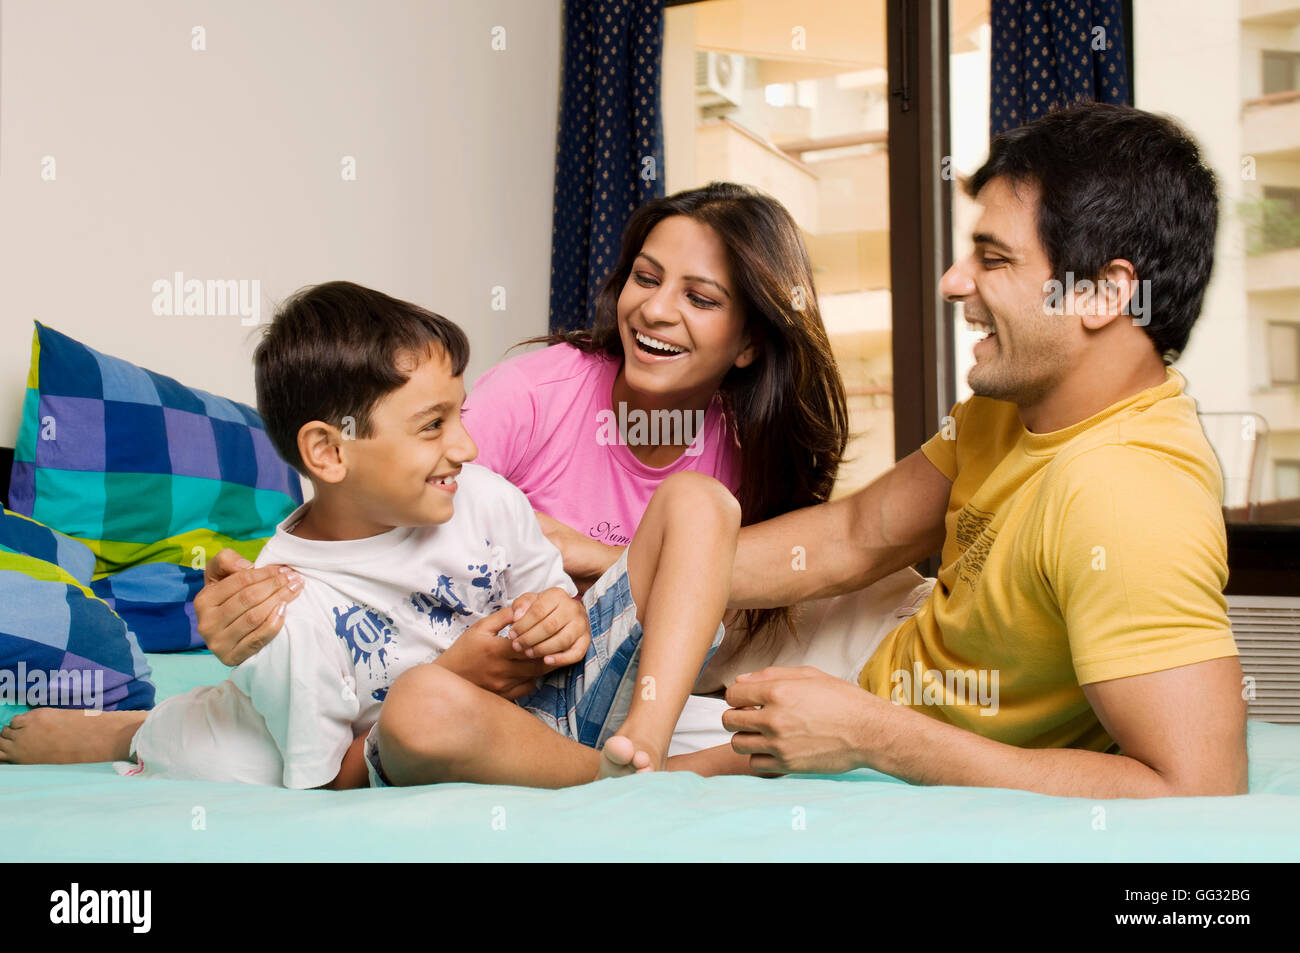 Family in a playful mood Stock Photo